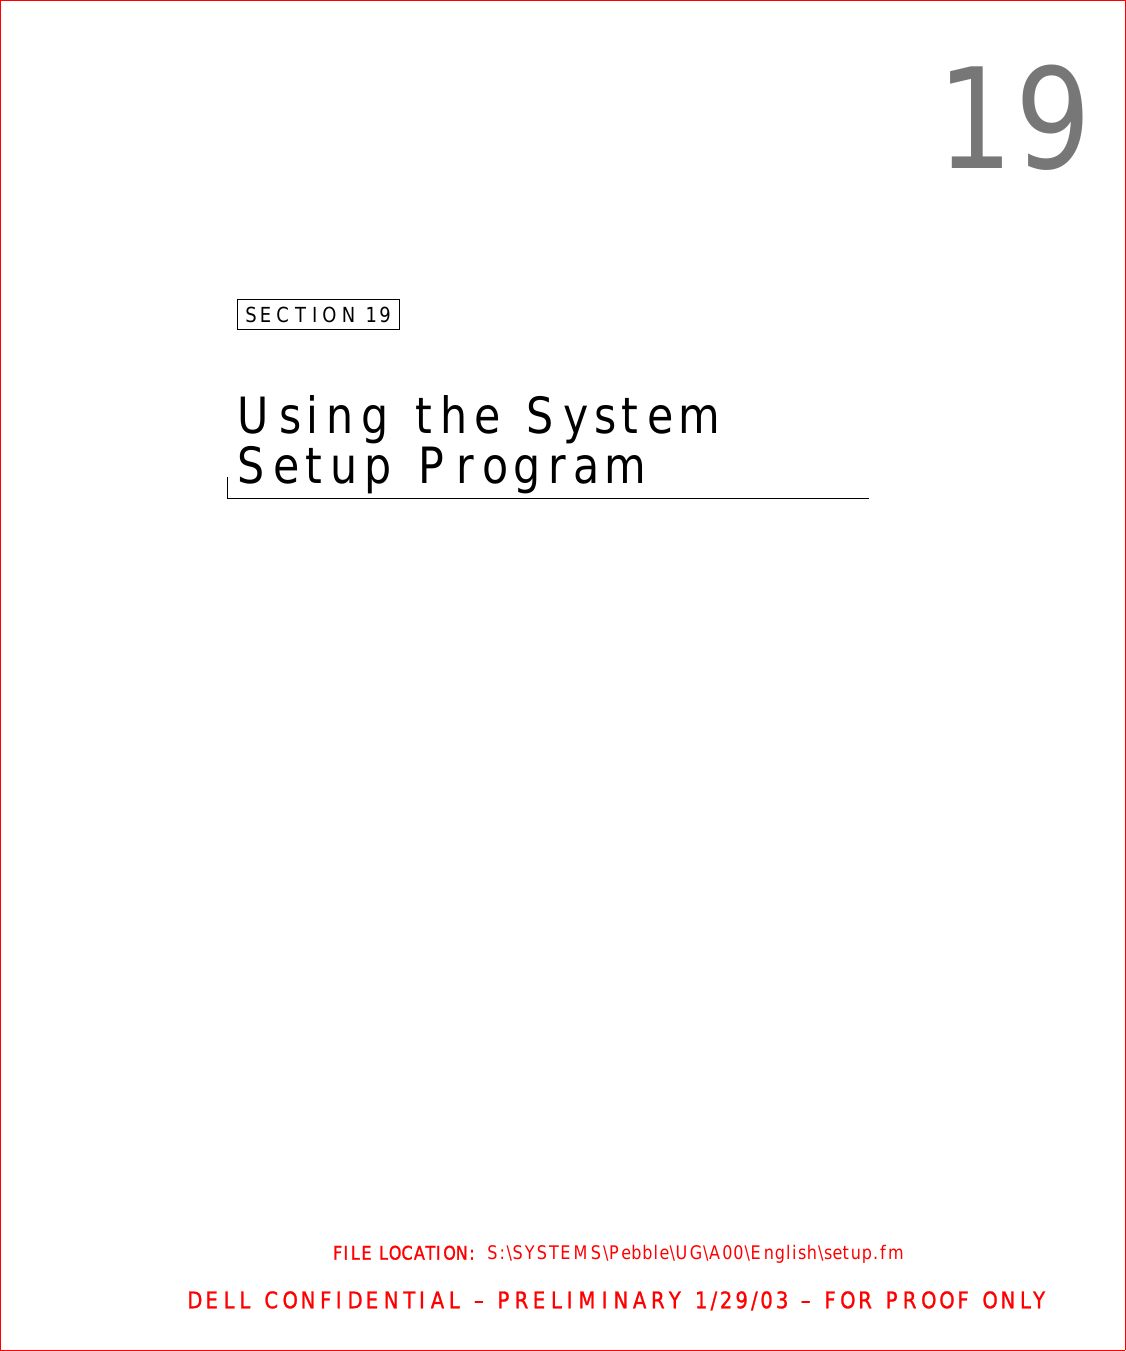 FILE LOCATION:  S:\SYSTEMS\Pebble\UG\A00\English\setup.fmDELL CONFIDENTIAL – PRELIMINARY 1/29/03 – FOR PROOF ONLY19SECTION 19Using the System Setup Program 